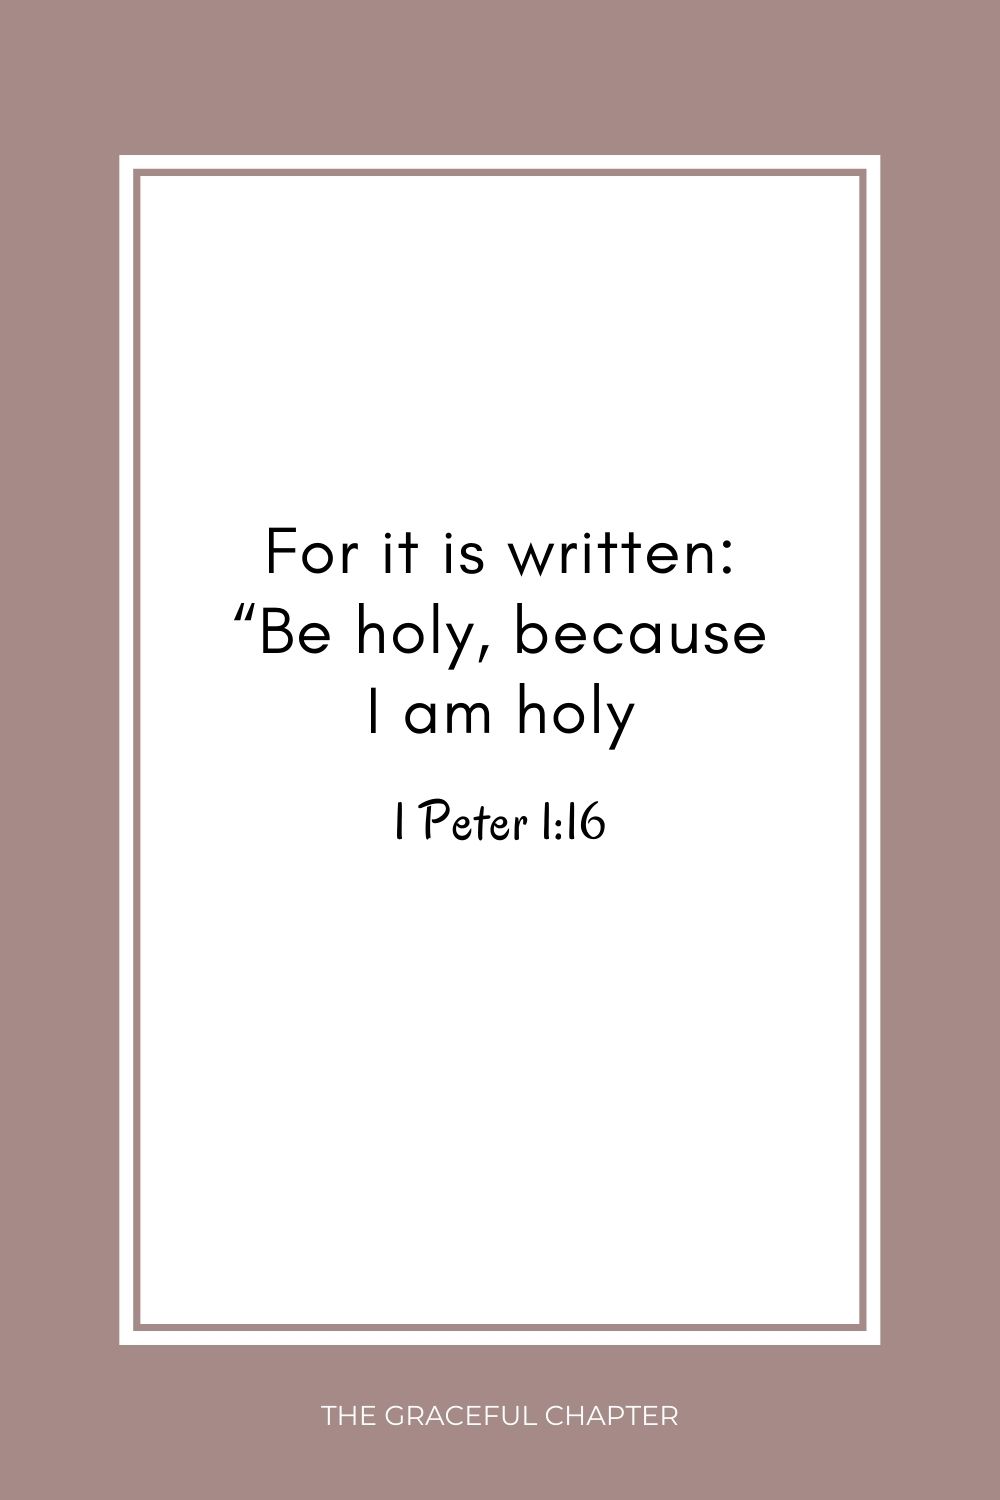 For it is written: “Be holy, because I am holy. 1 Peter 1:16